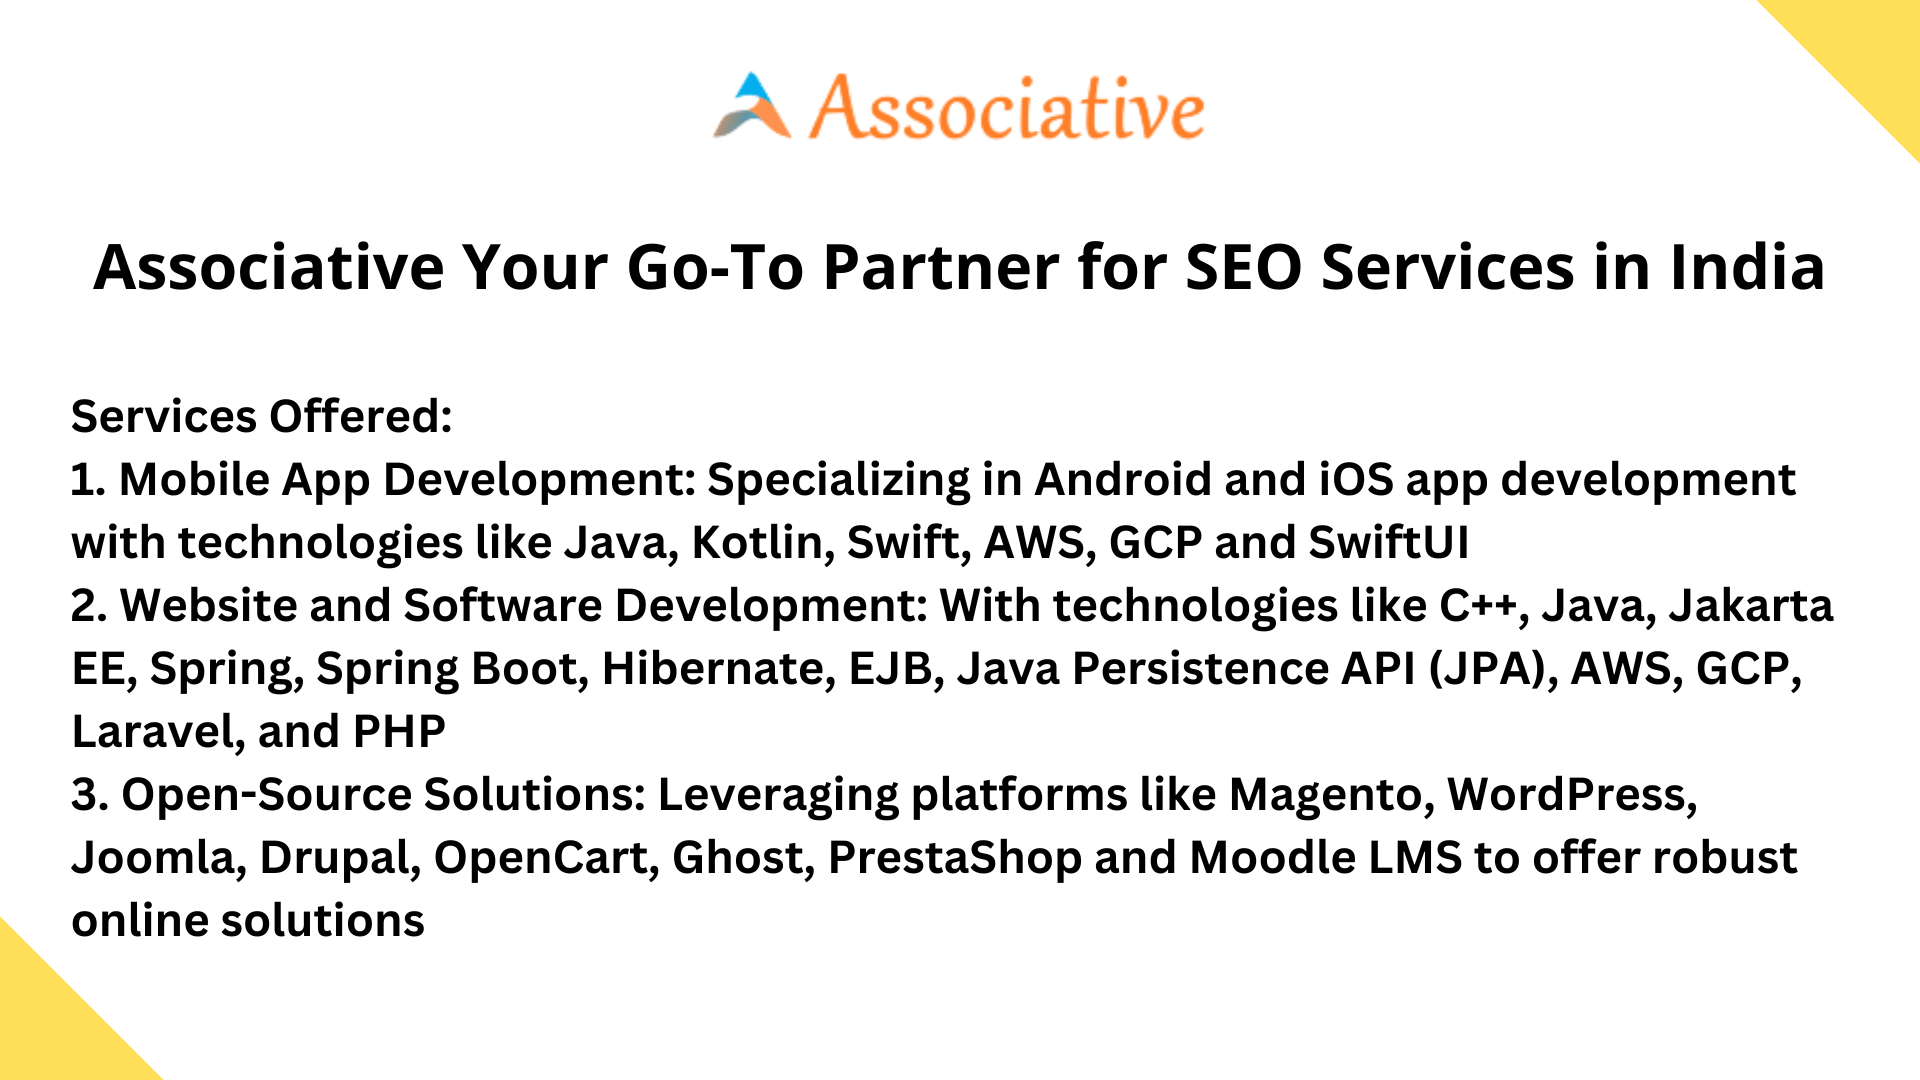 Associative Your Go-To Partner for SEO Services in India